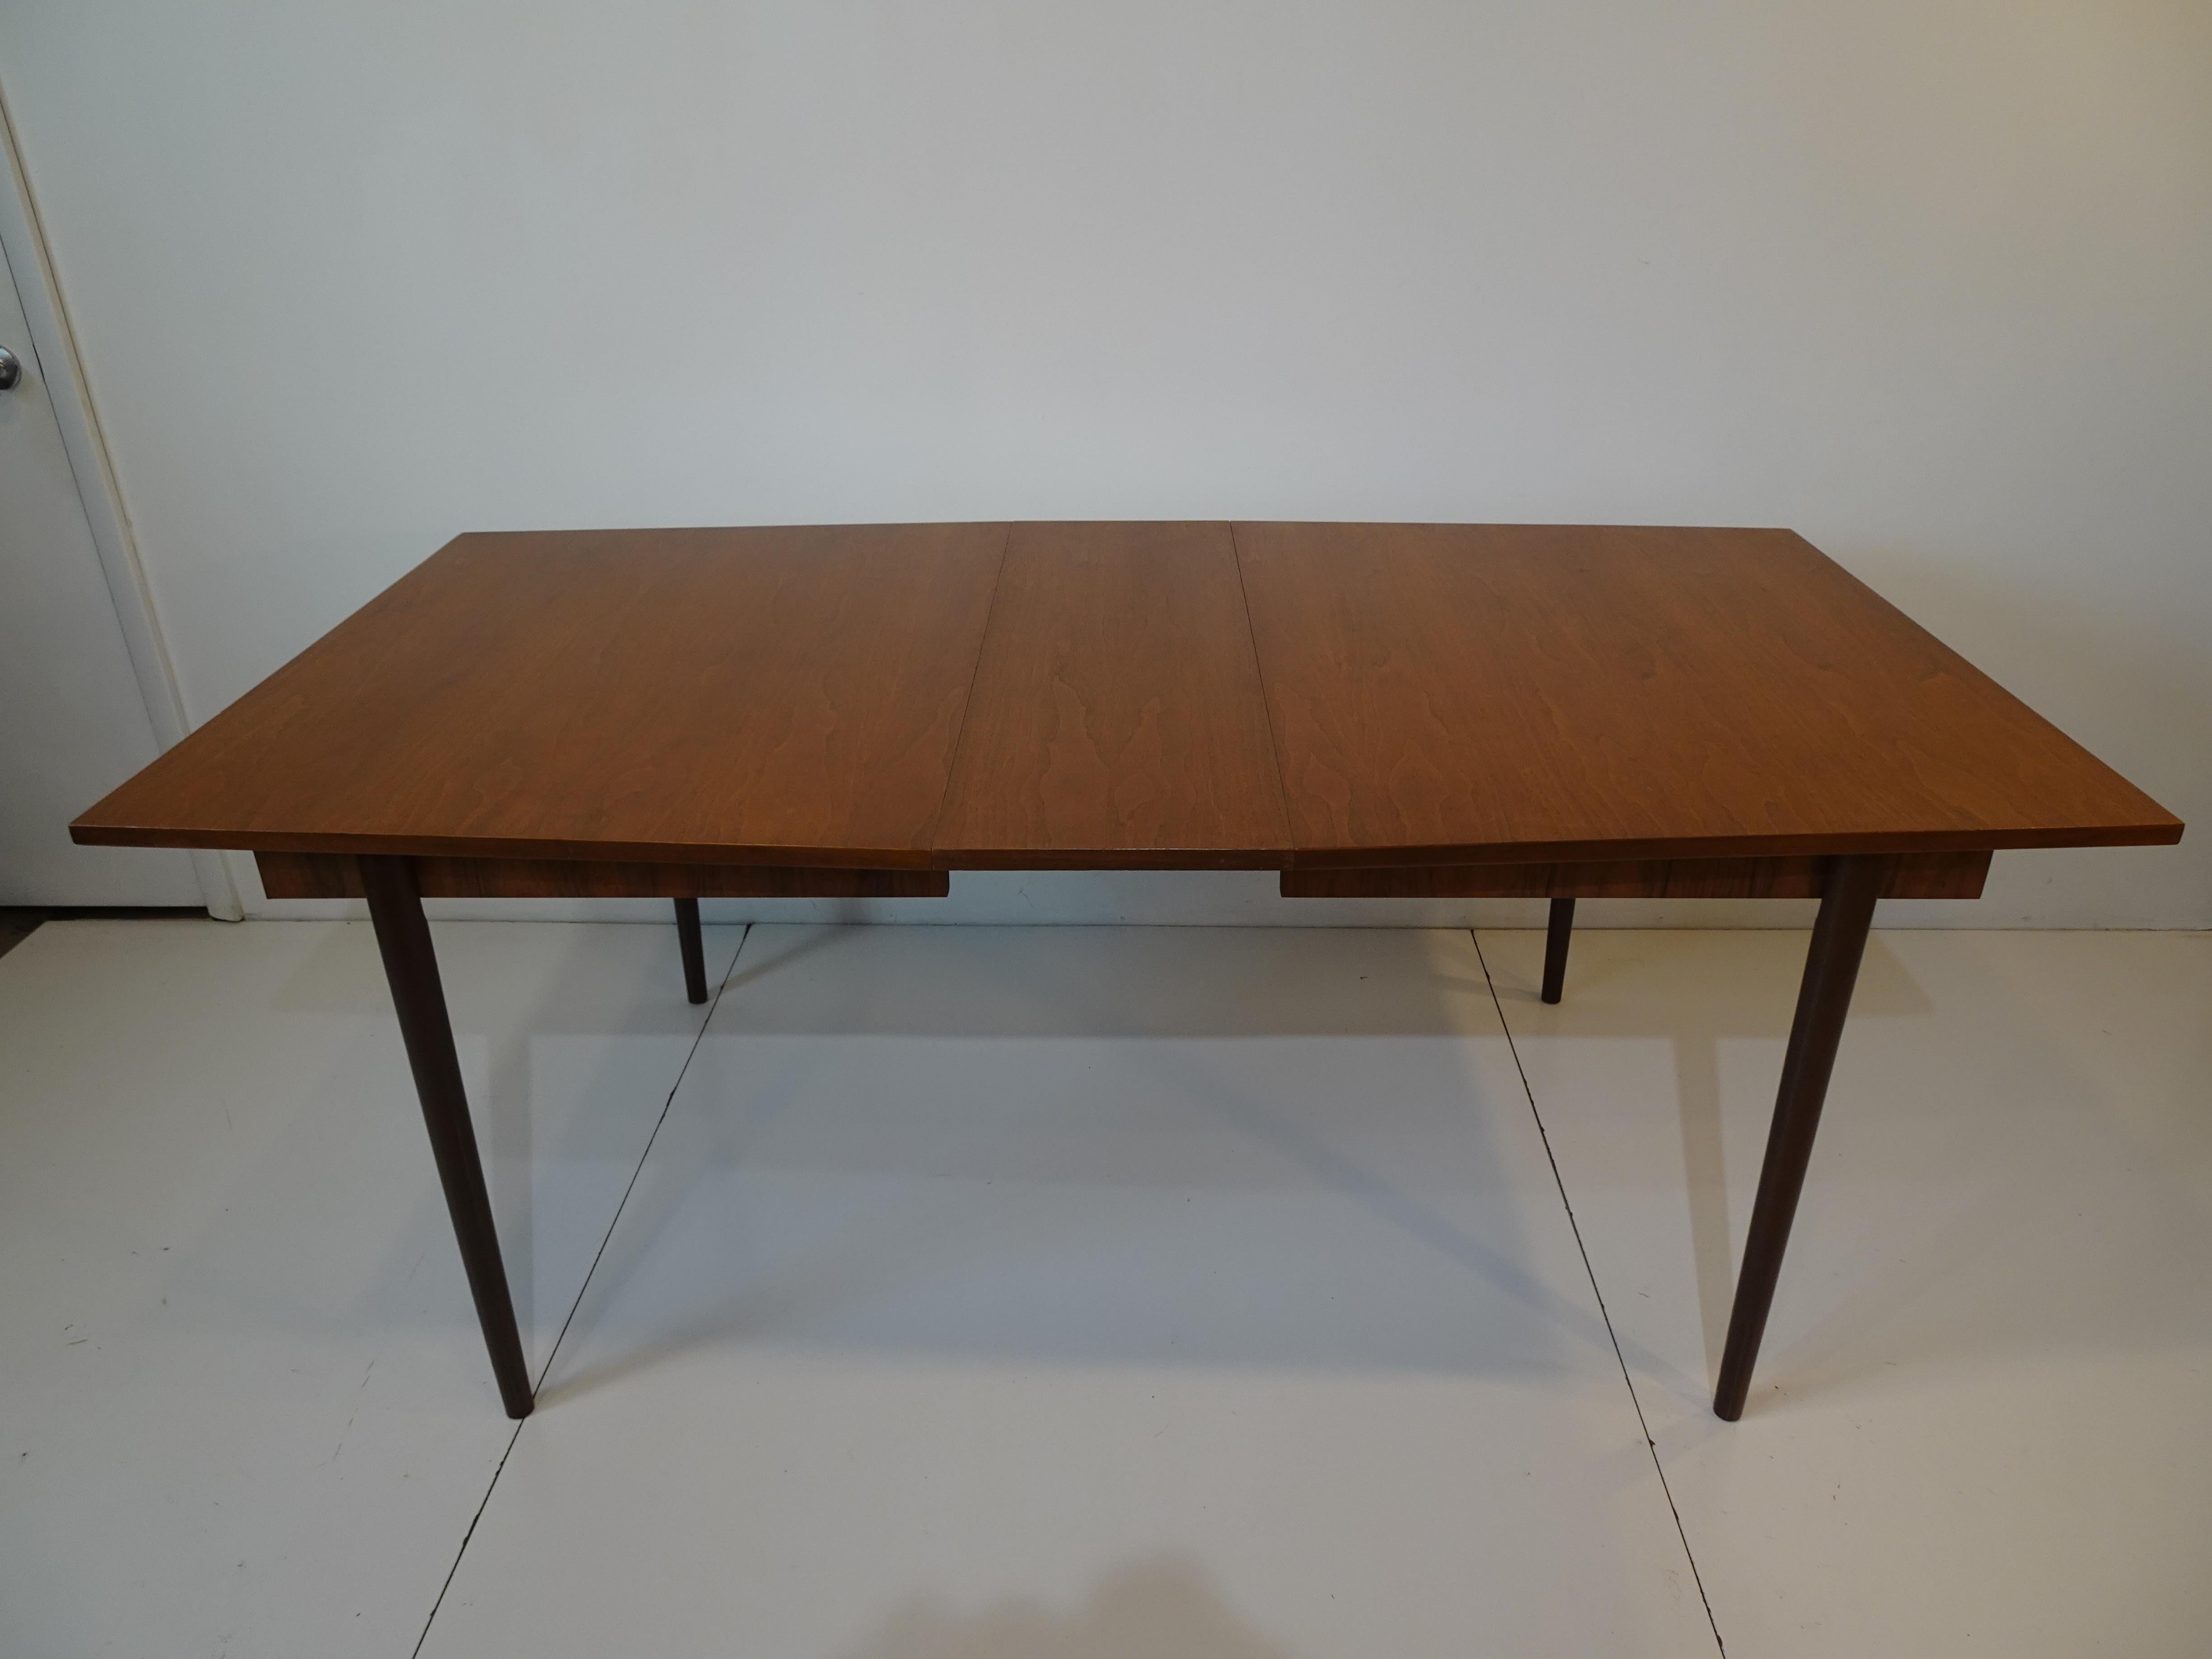 A medium toned mid century walnut dining table with tapered ends and one 12